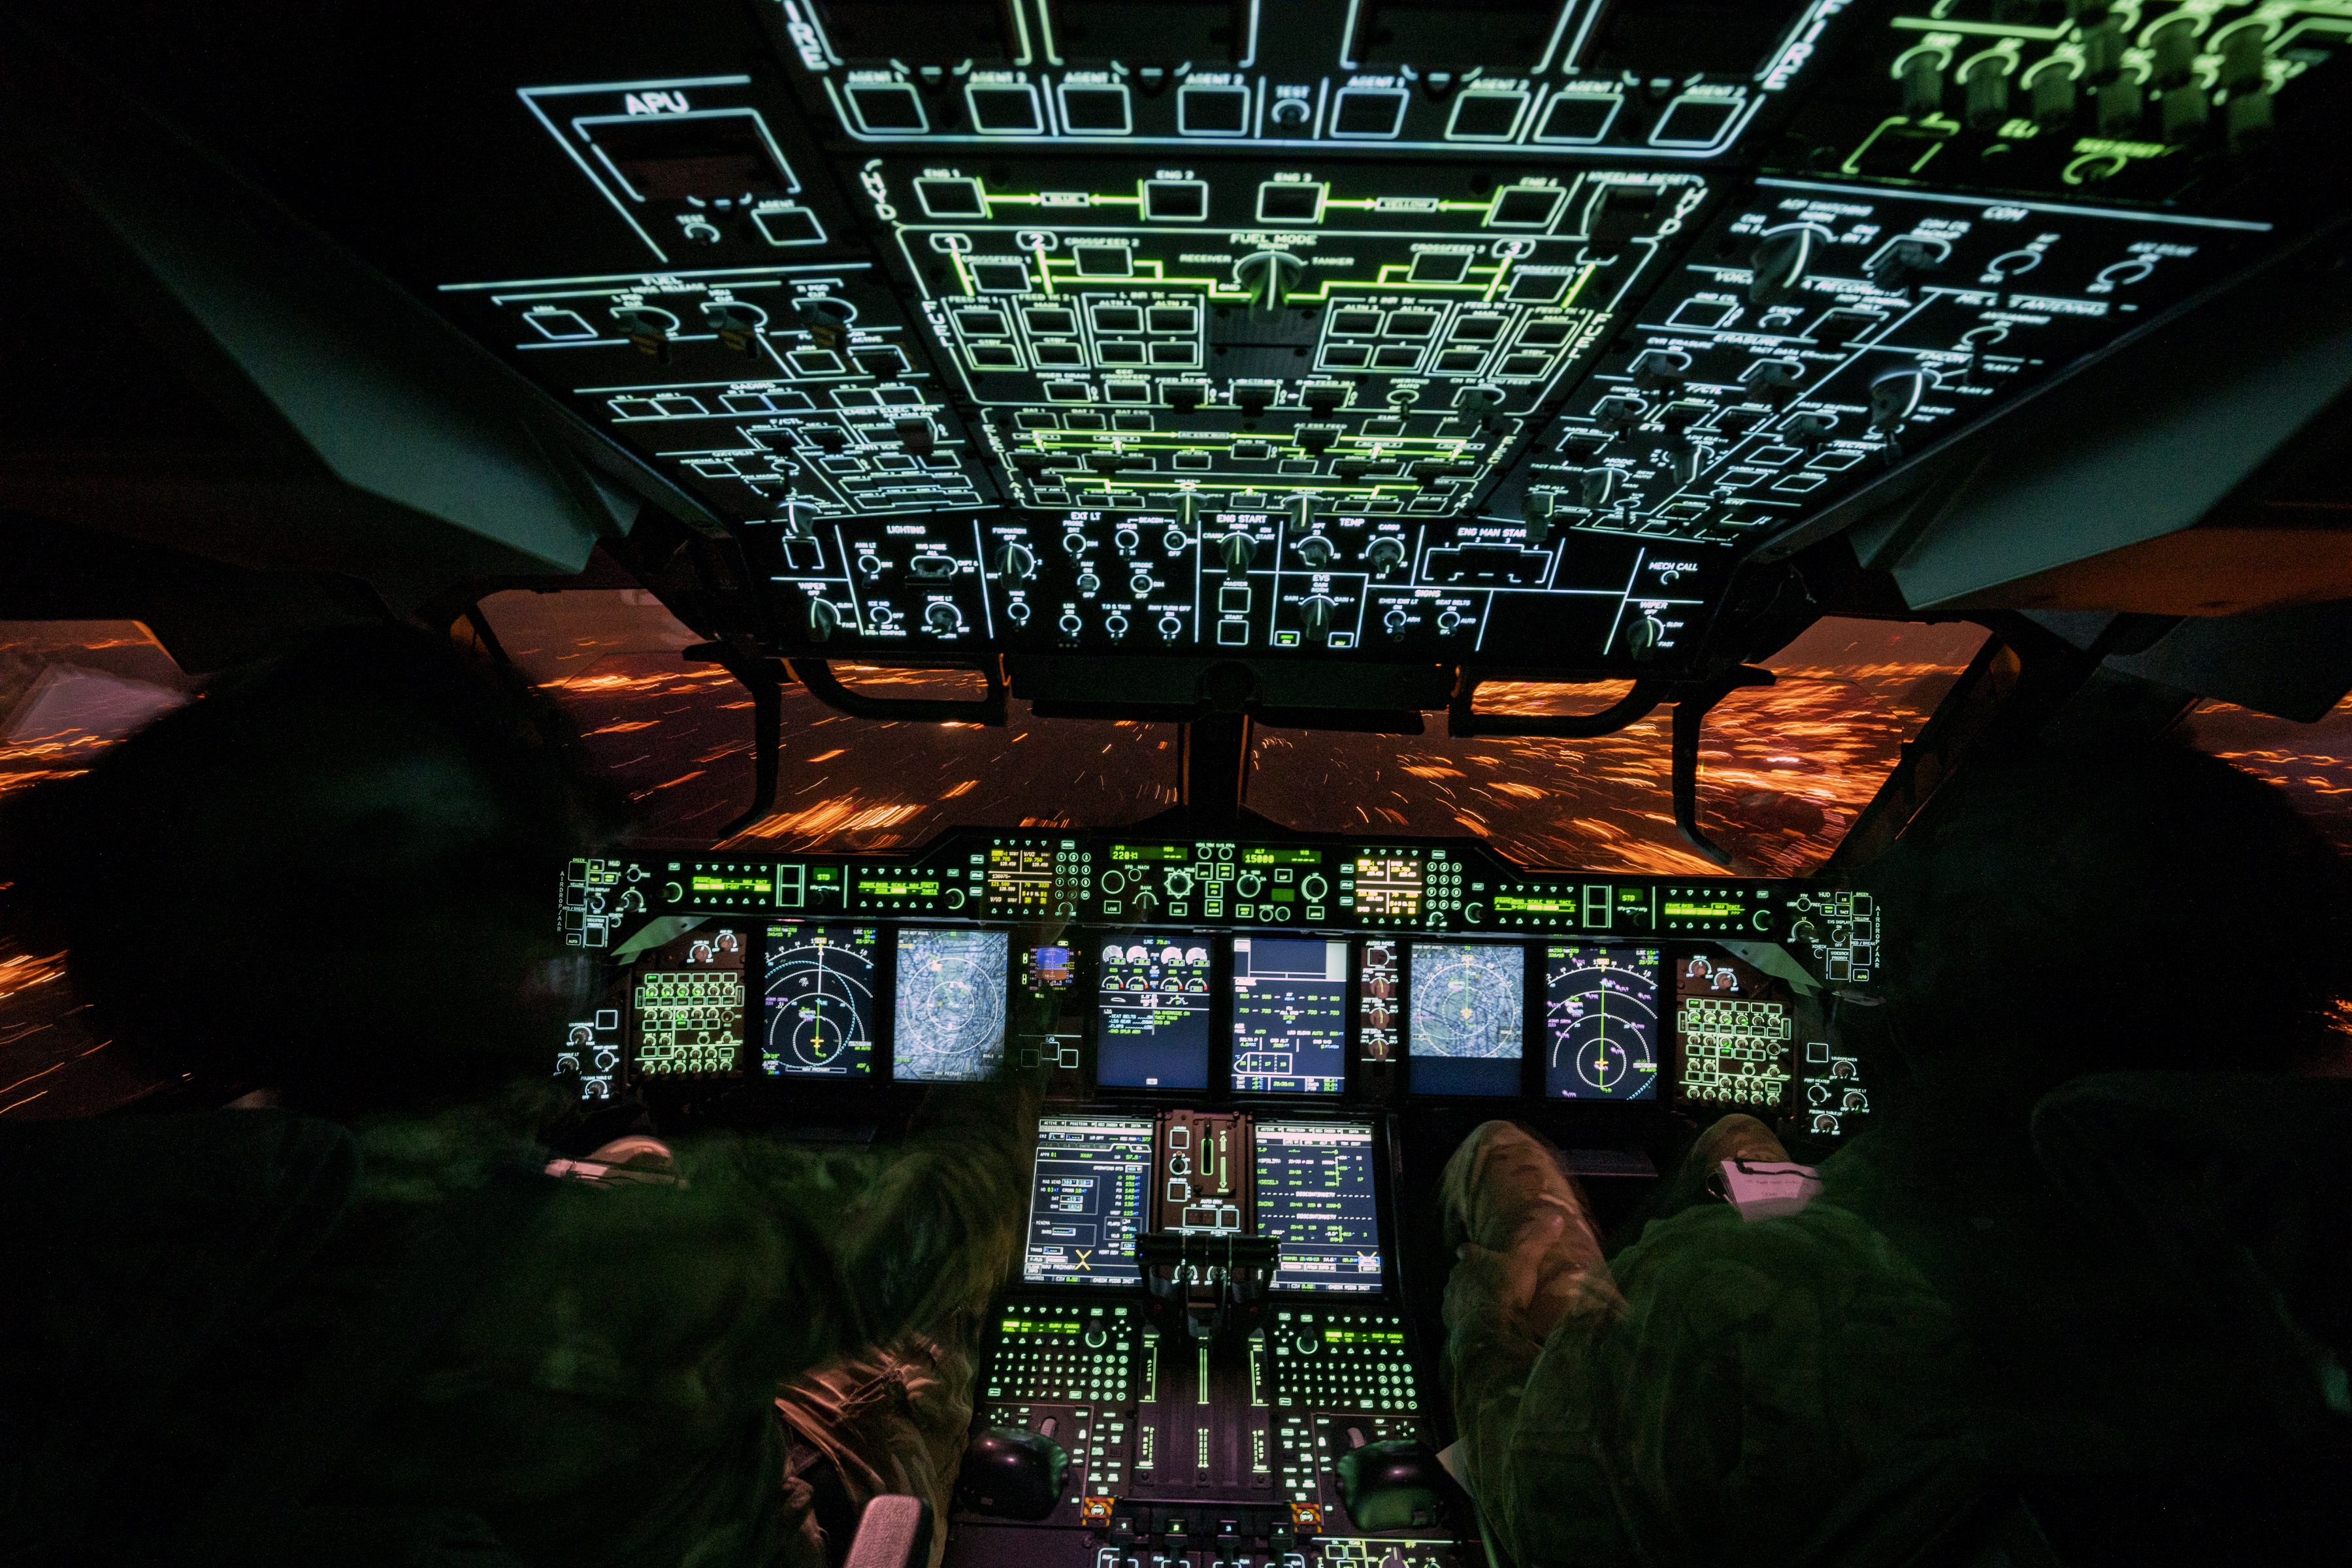 Inside the cockpit at night, with all instruments lit up.